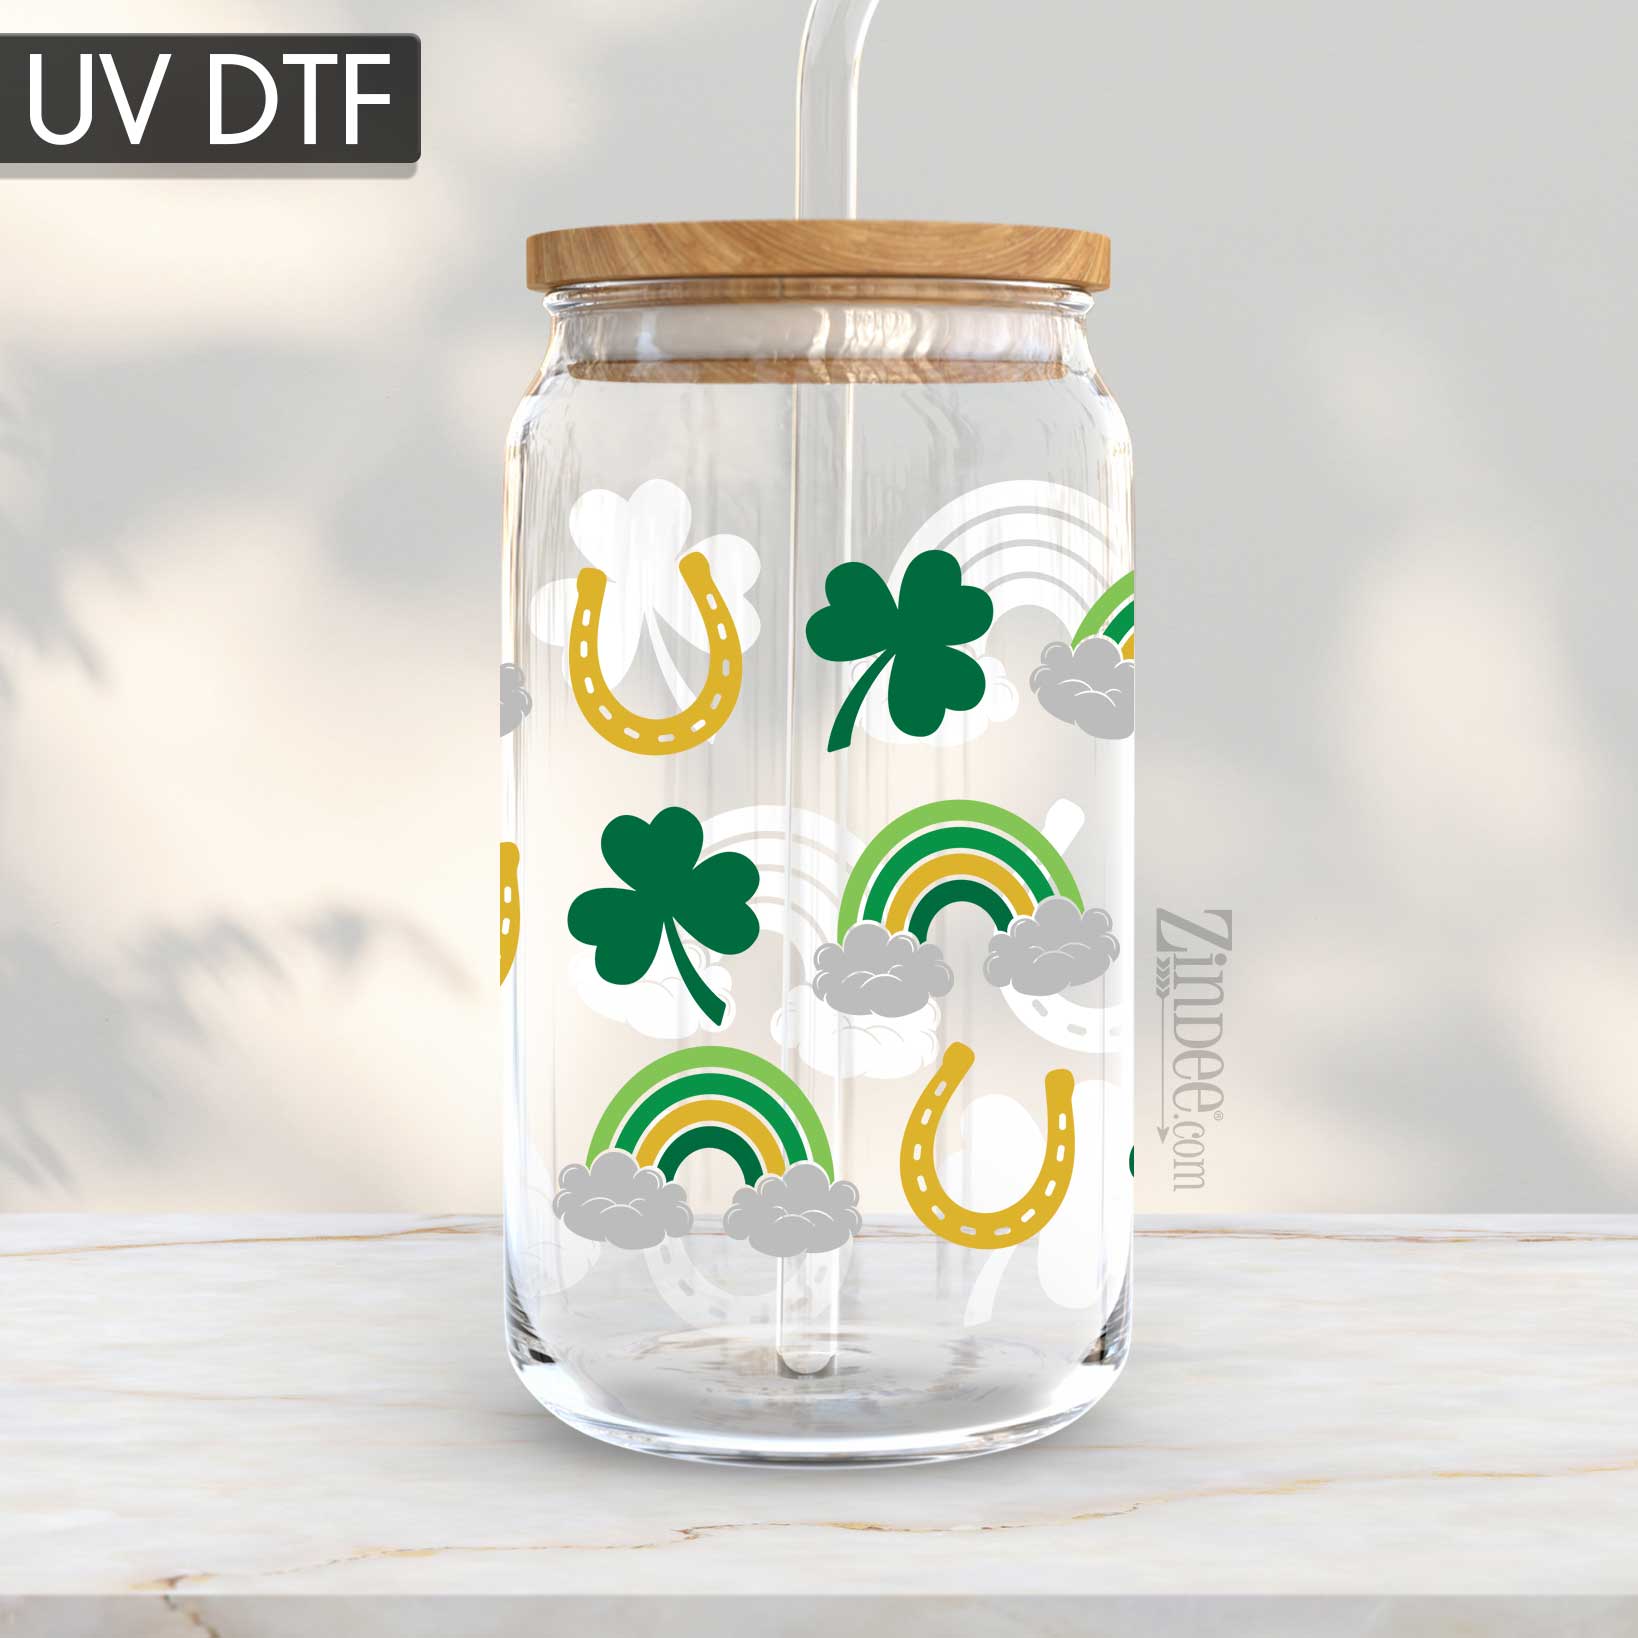 You Should See UV DTF Decal –